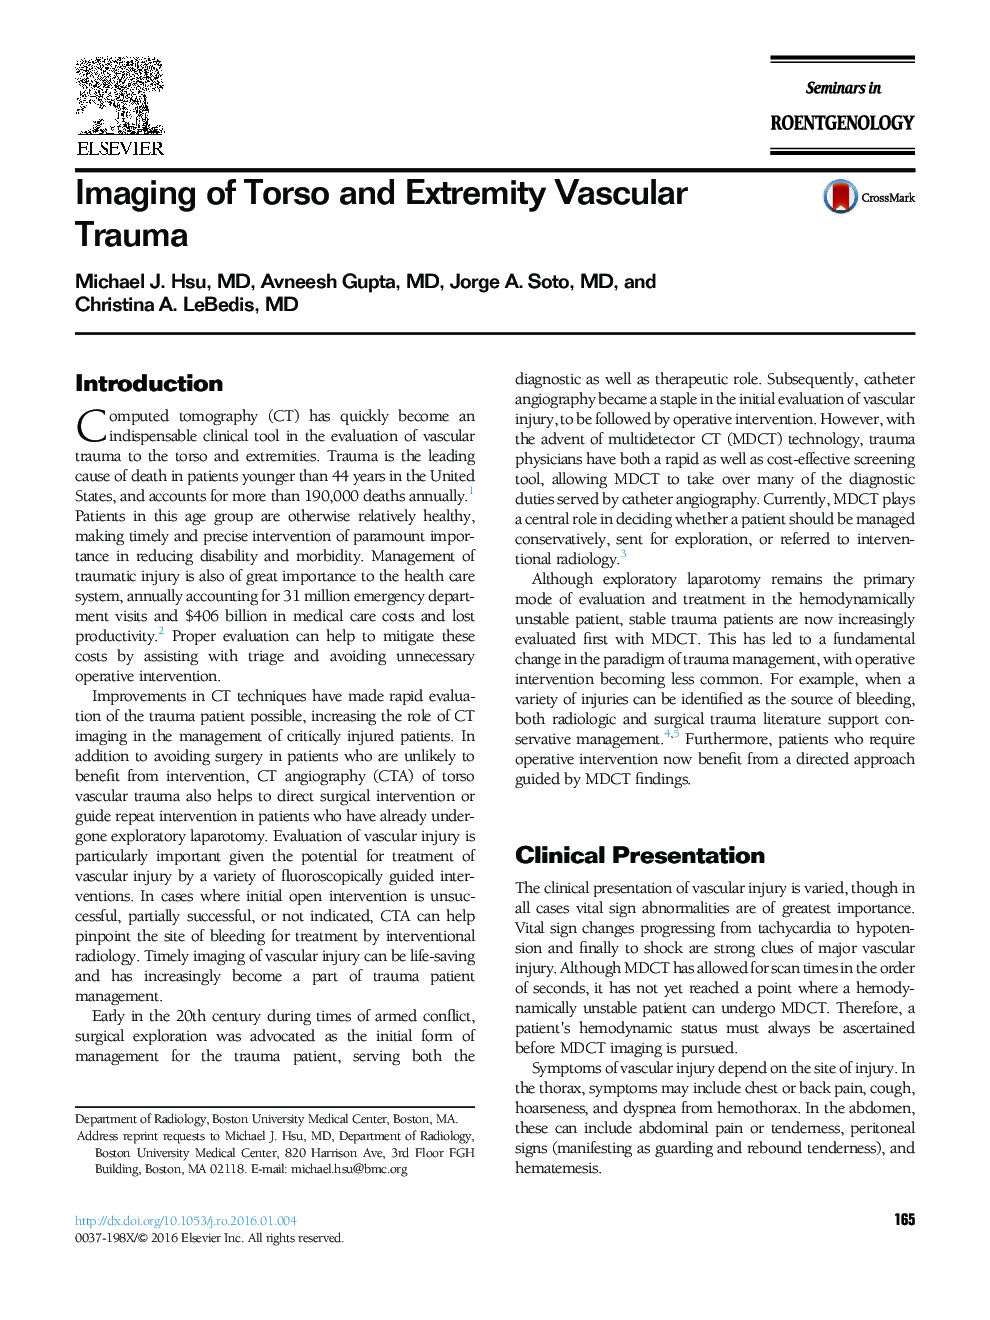 Imaging of Torso and Extremity Vascular Trauma